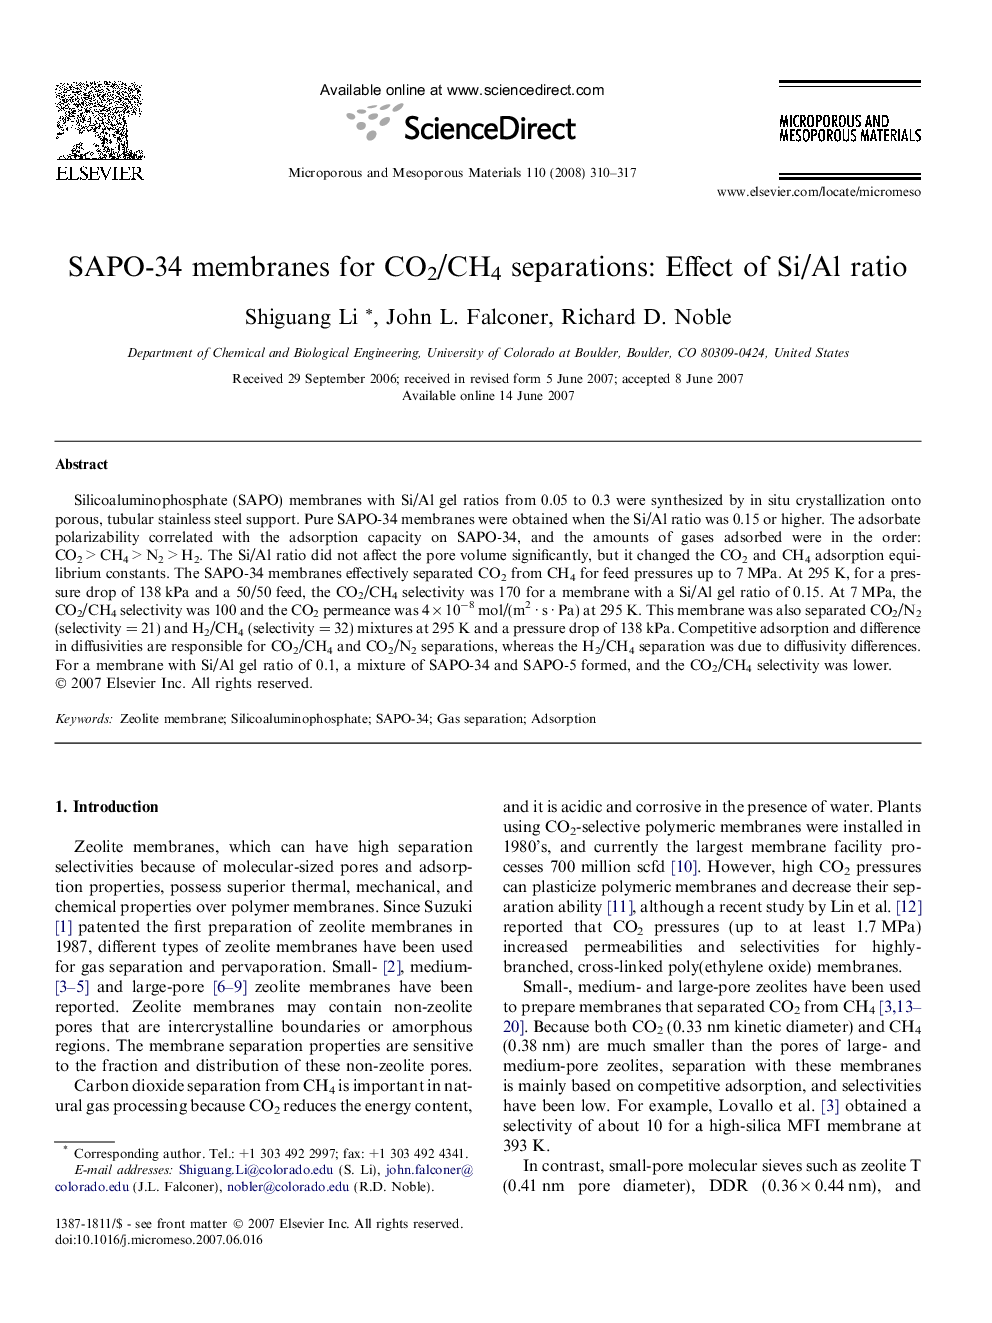 SAPO-34 membranes for CO2/CH4 separations: Effect of Si/Al ratio